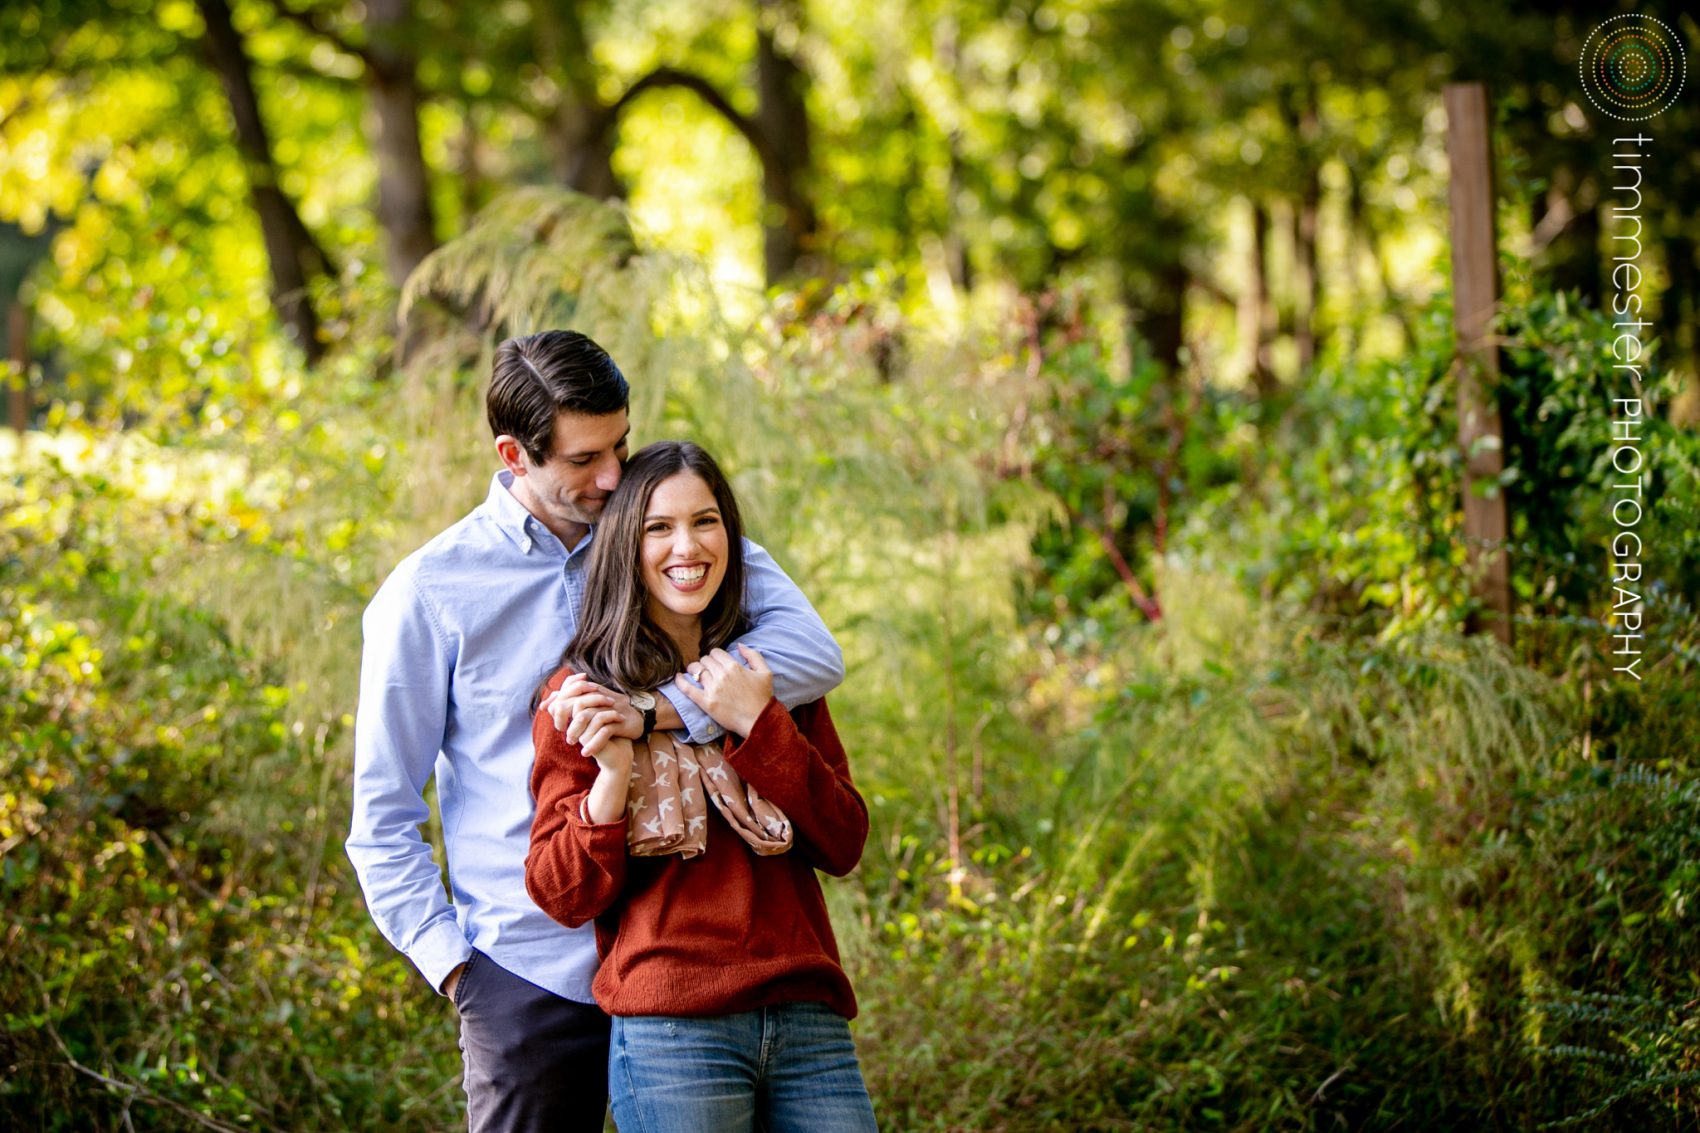 Engagement pictures from the Barn at Valhalla in Chapel Hill, NC